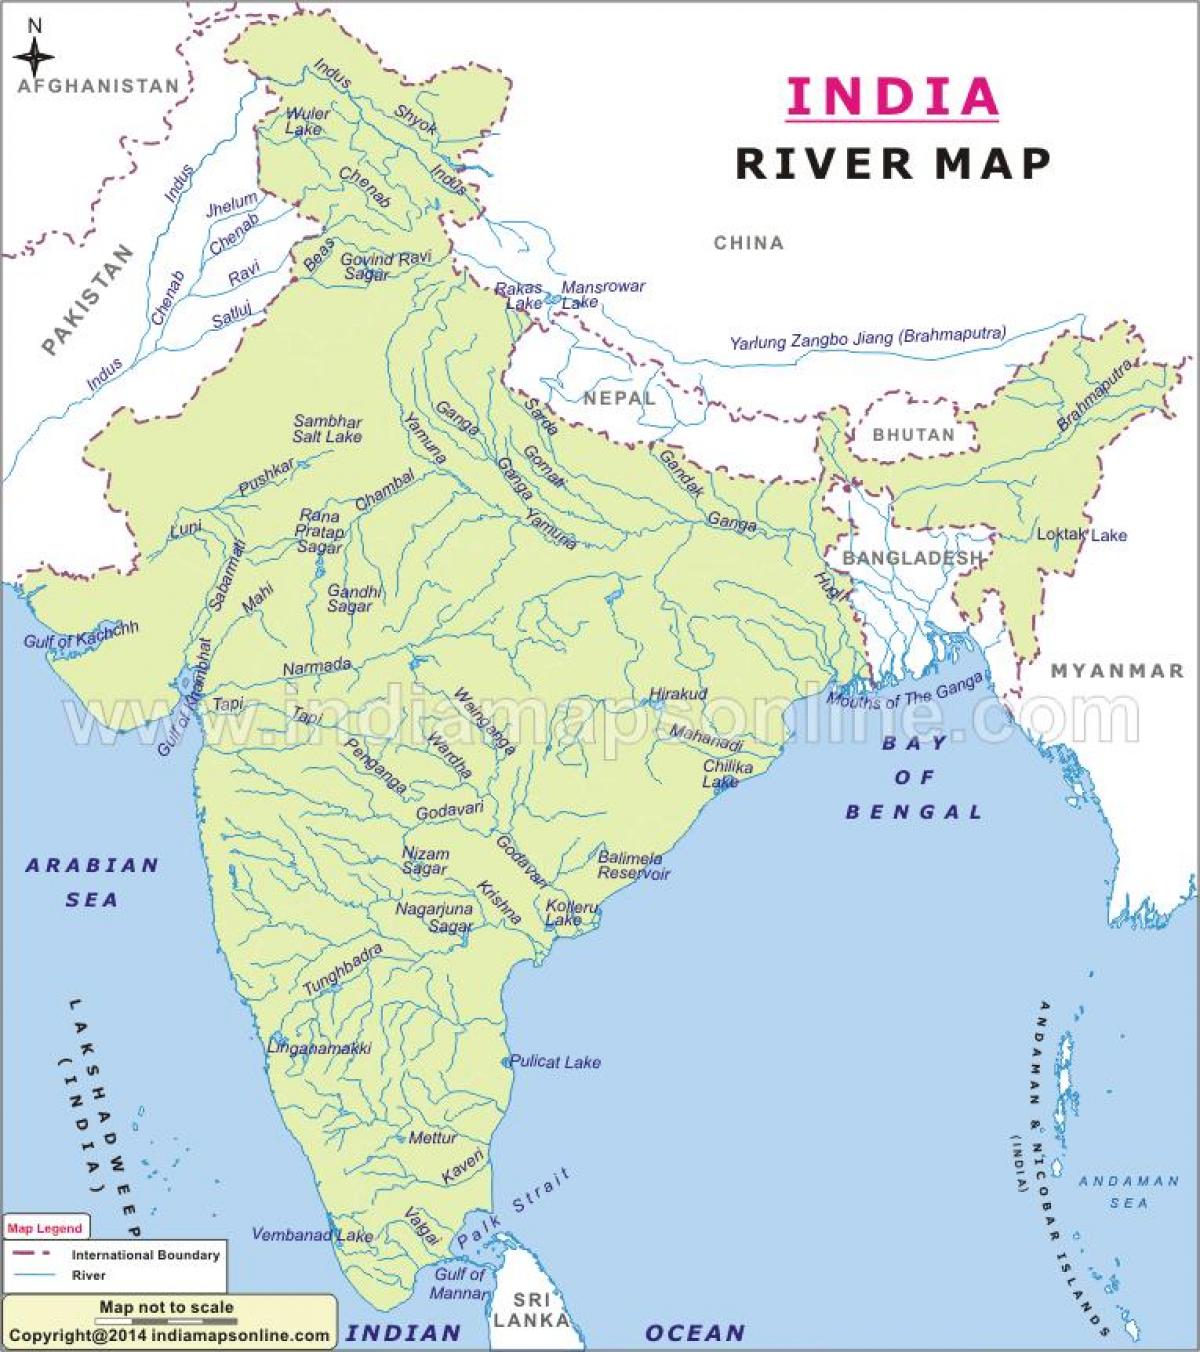 sindhu river map of India